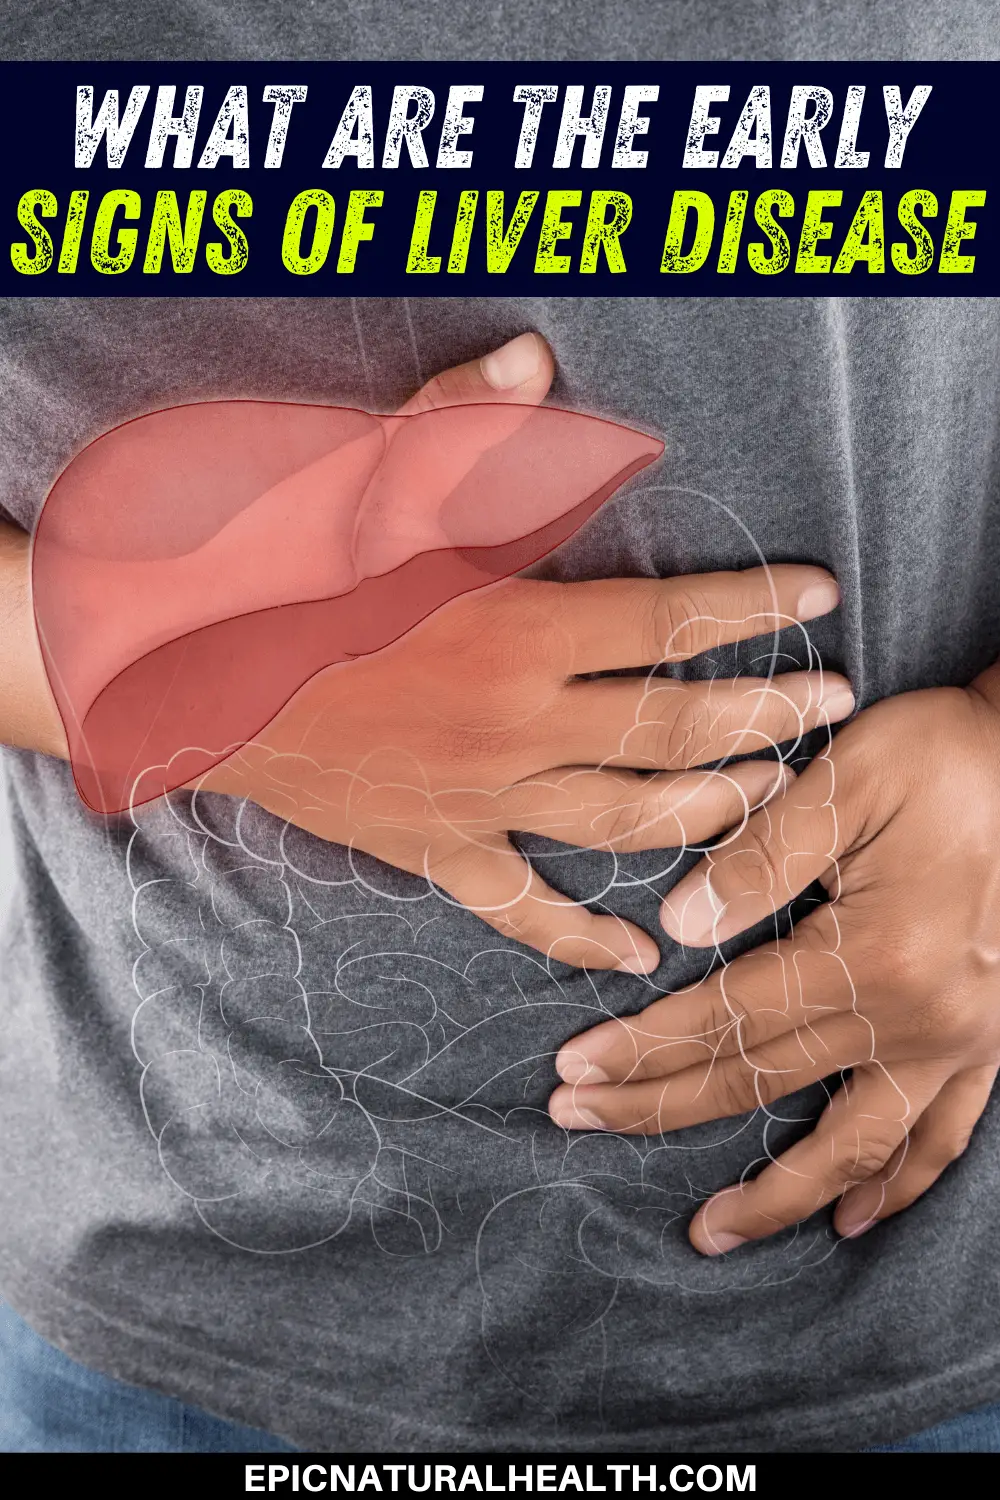 What Are The Early Signs of Liver Disease